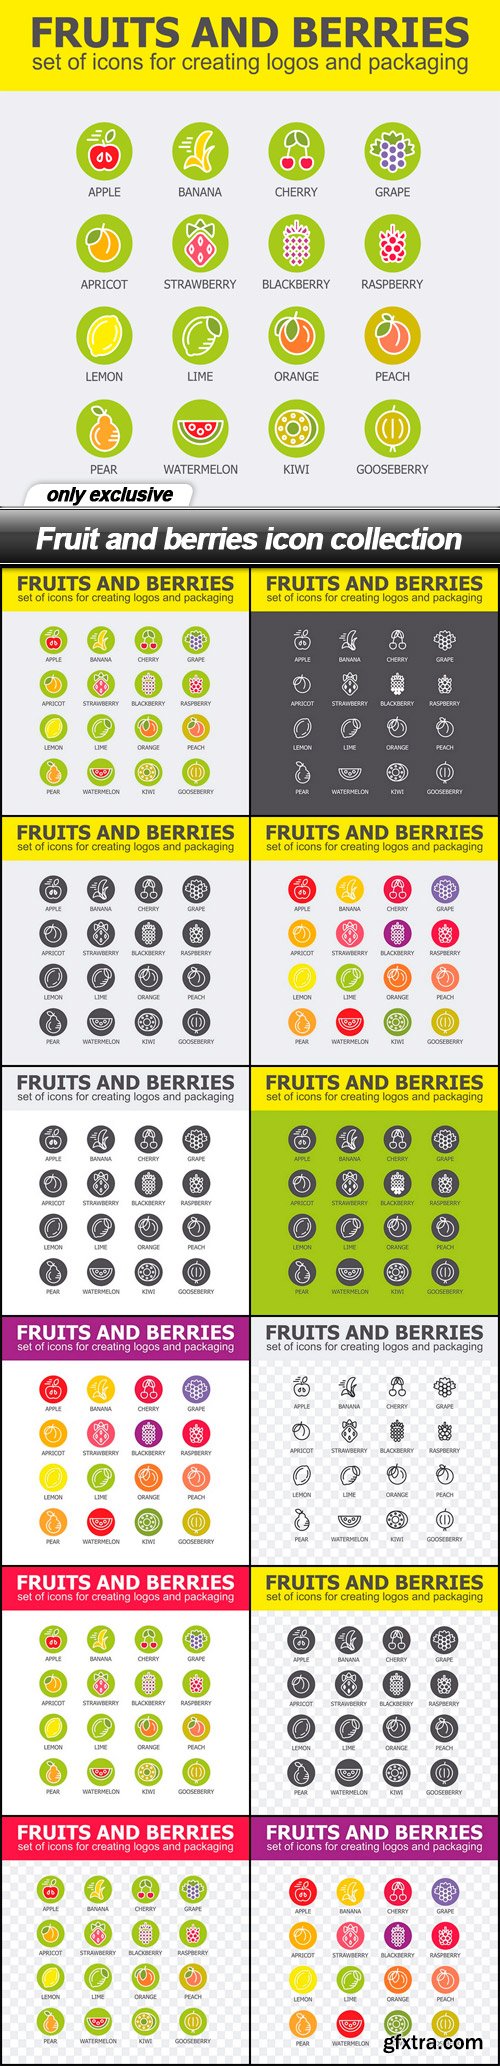 Fruit and berries icon collection - 12 EPS